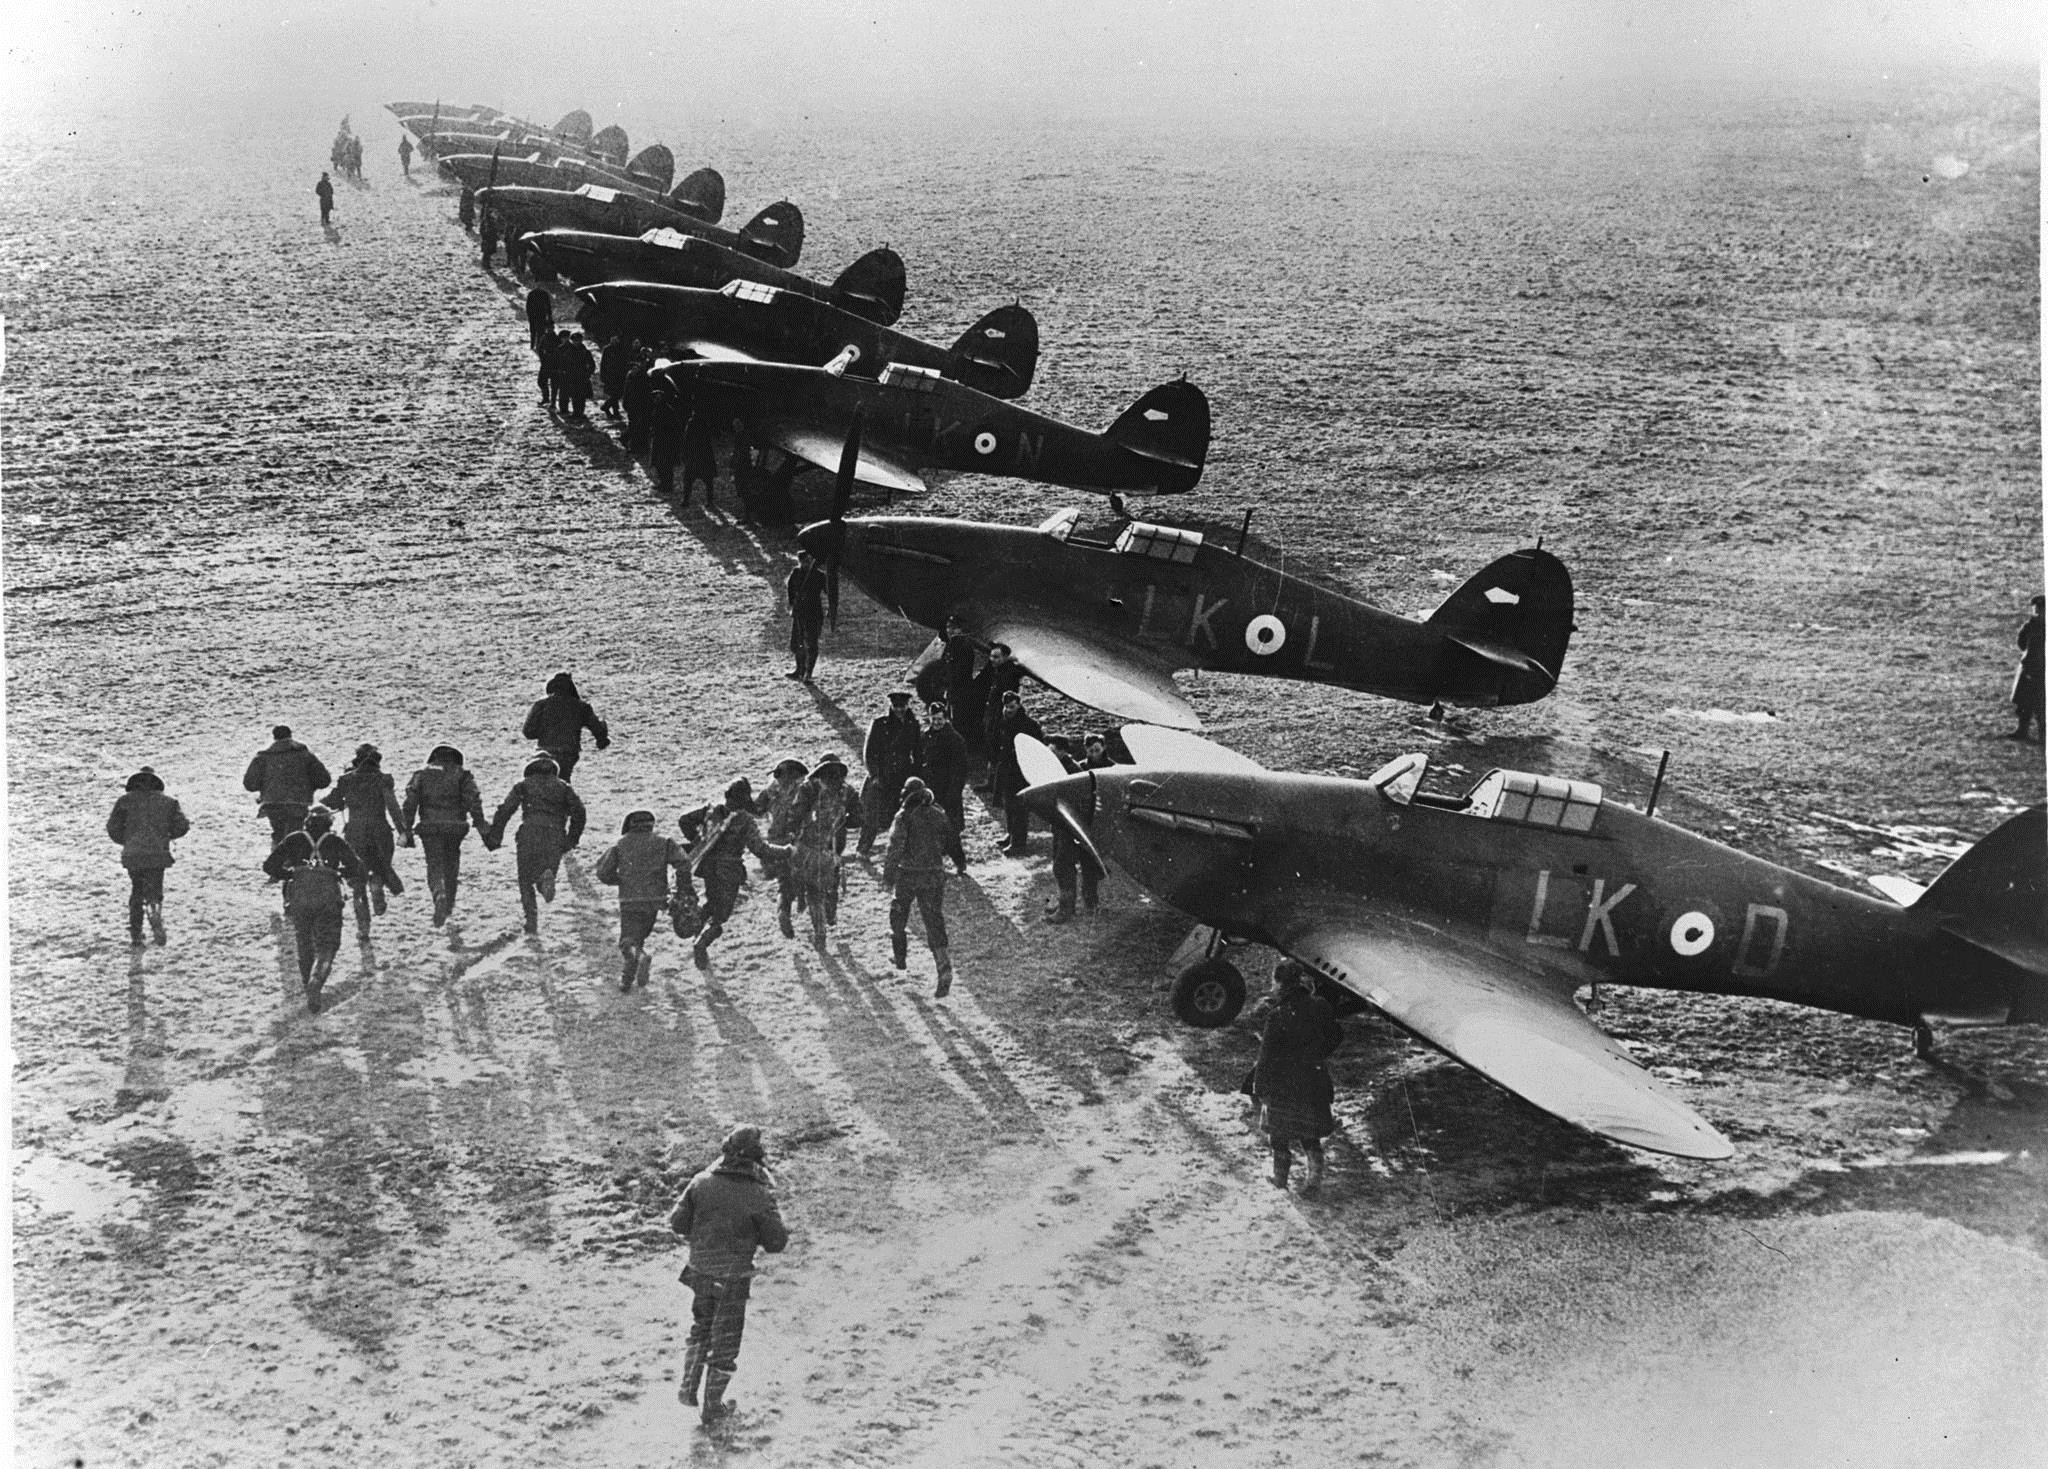 Pilots scramble for their Hawker Hurricane fighters at an airfield in England to tackle the Luftwaffe during the Battle of Britain. (photo via RCAF)